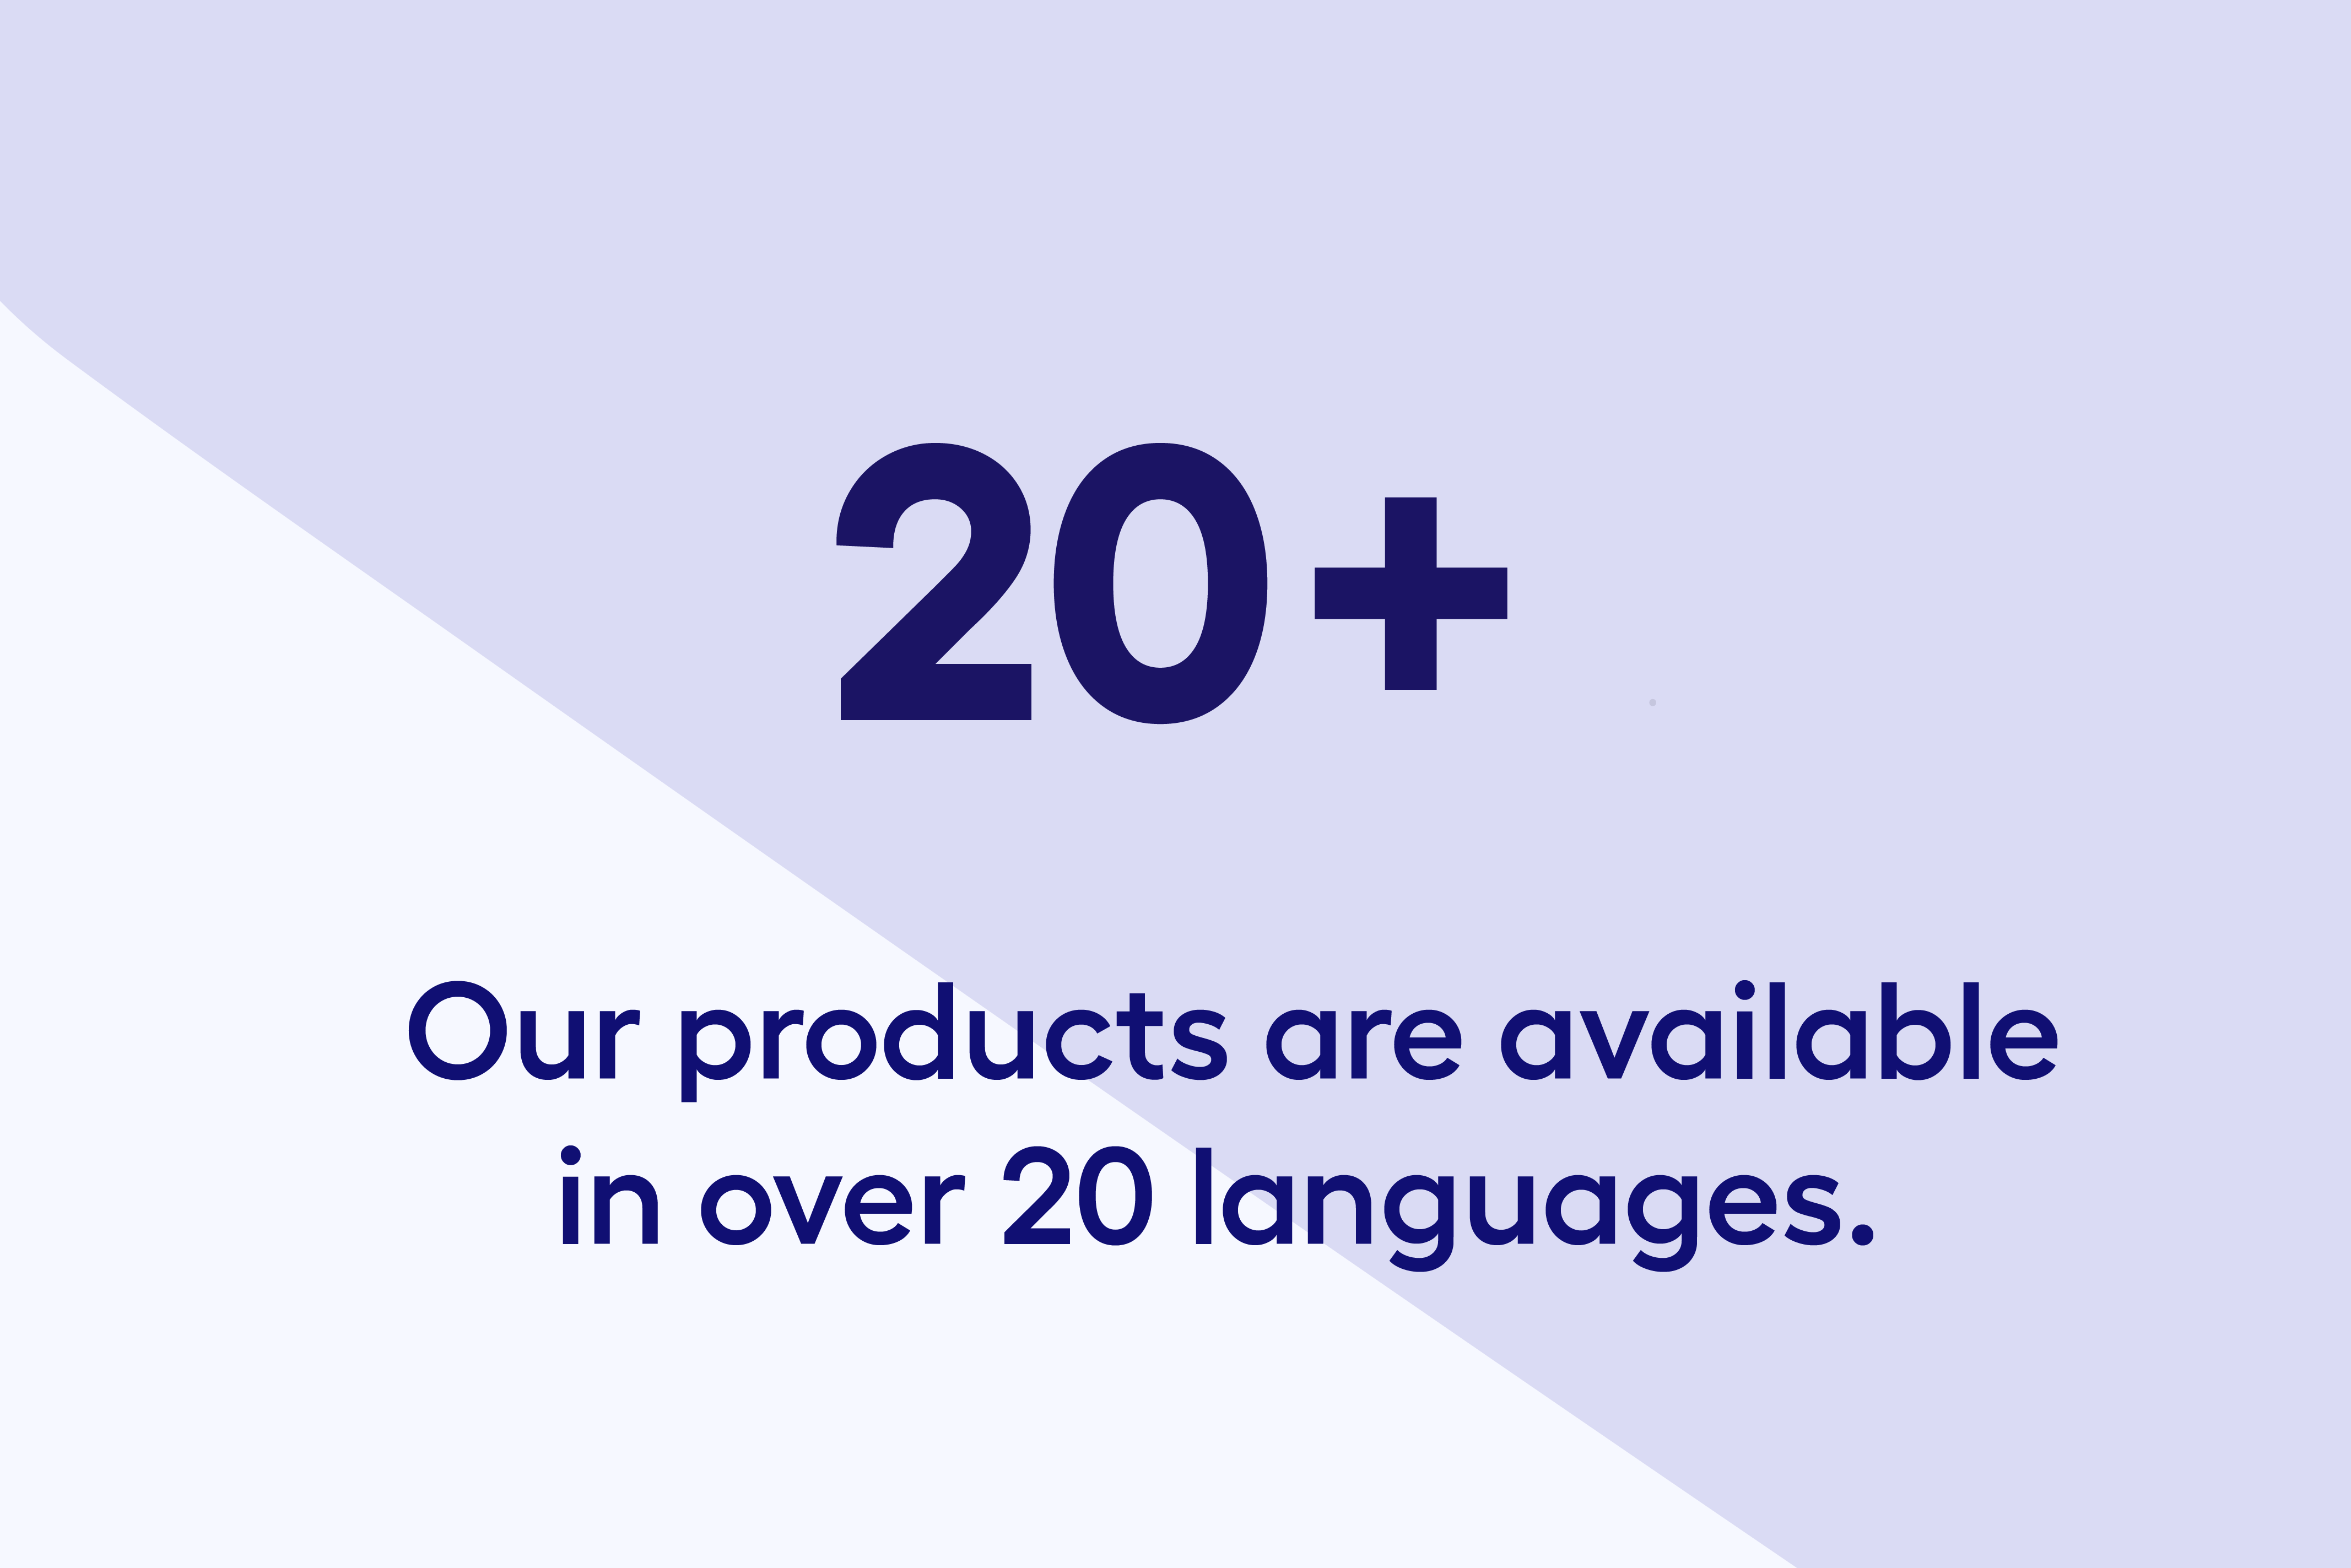 Infographic | Our products are available in over 20 languages